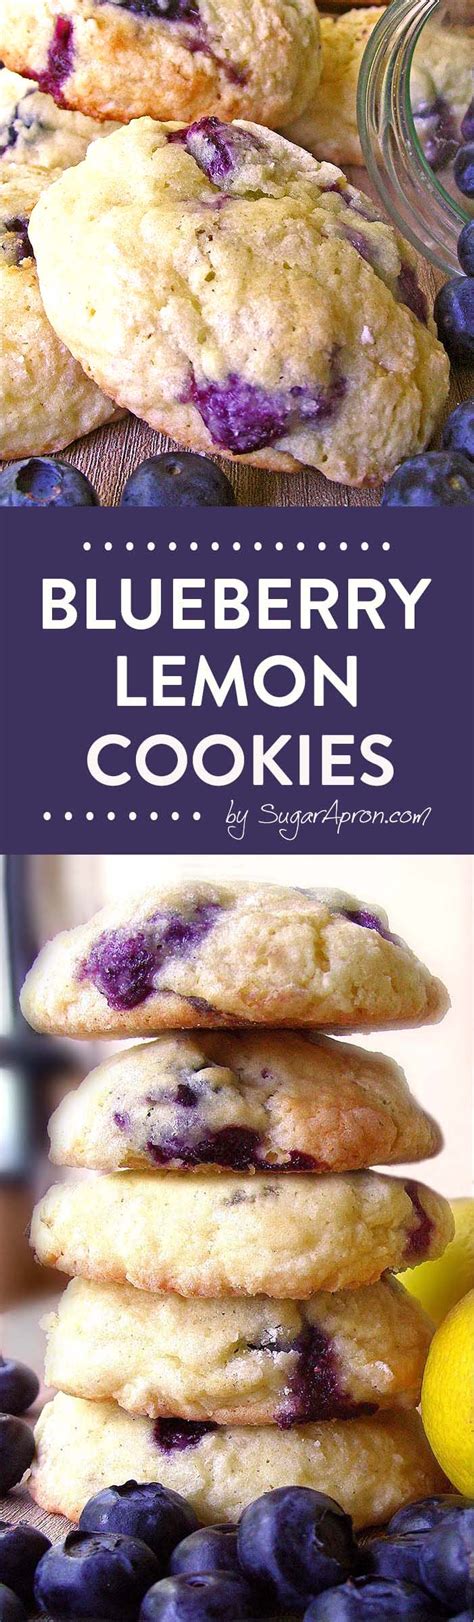 Quick and easy gluten free lemon cookies recipe that you'll love! Blueberry Lemon Cookies | Recipe (With images) | Lemon ...